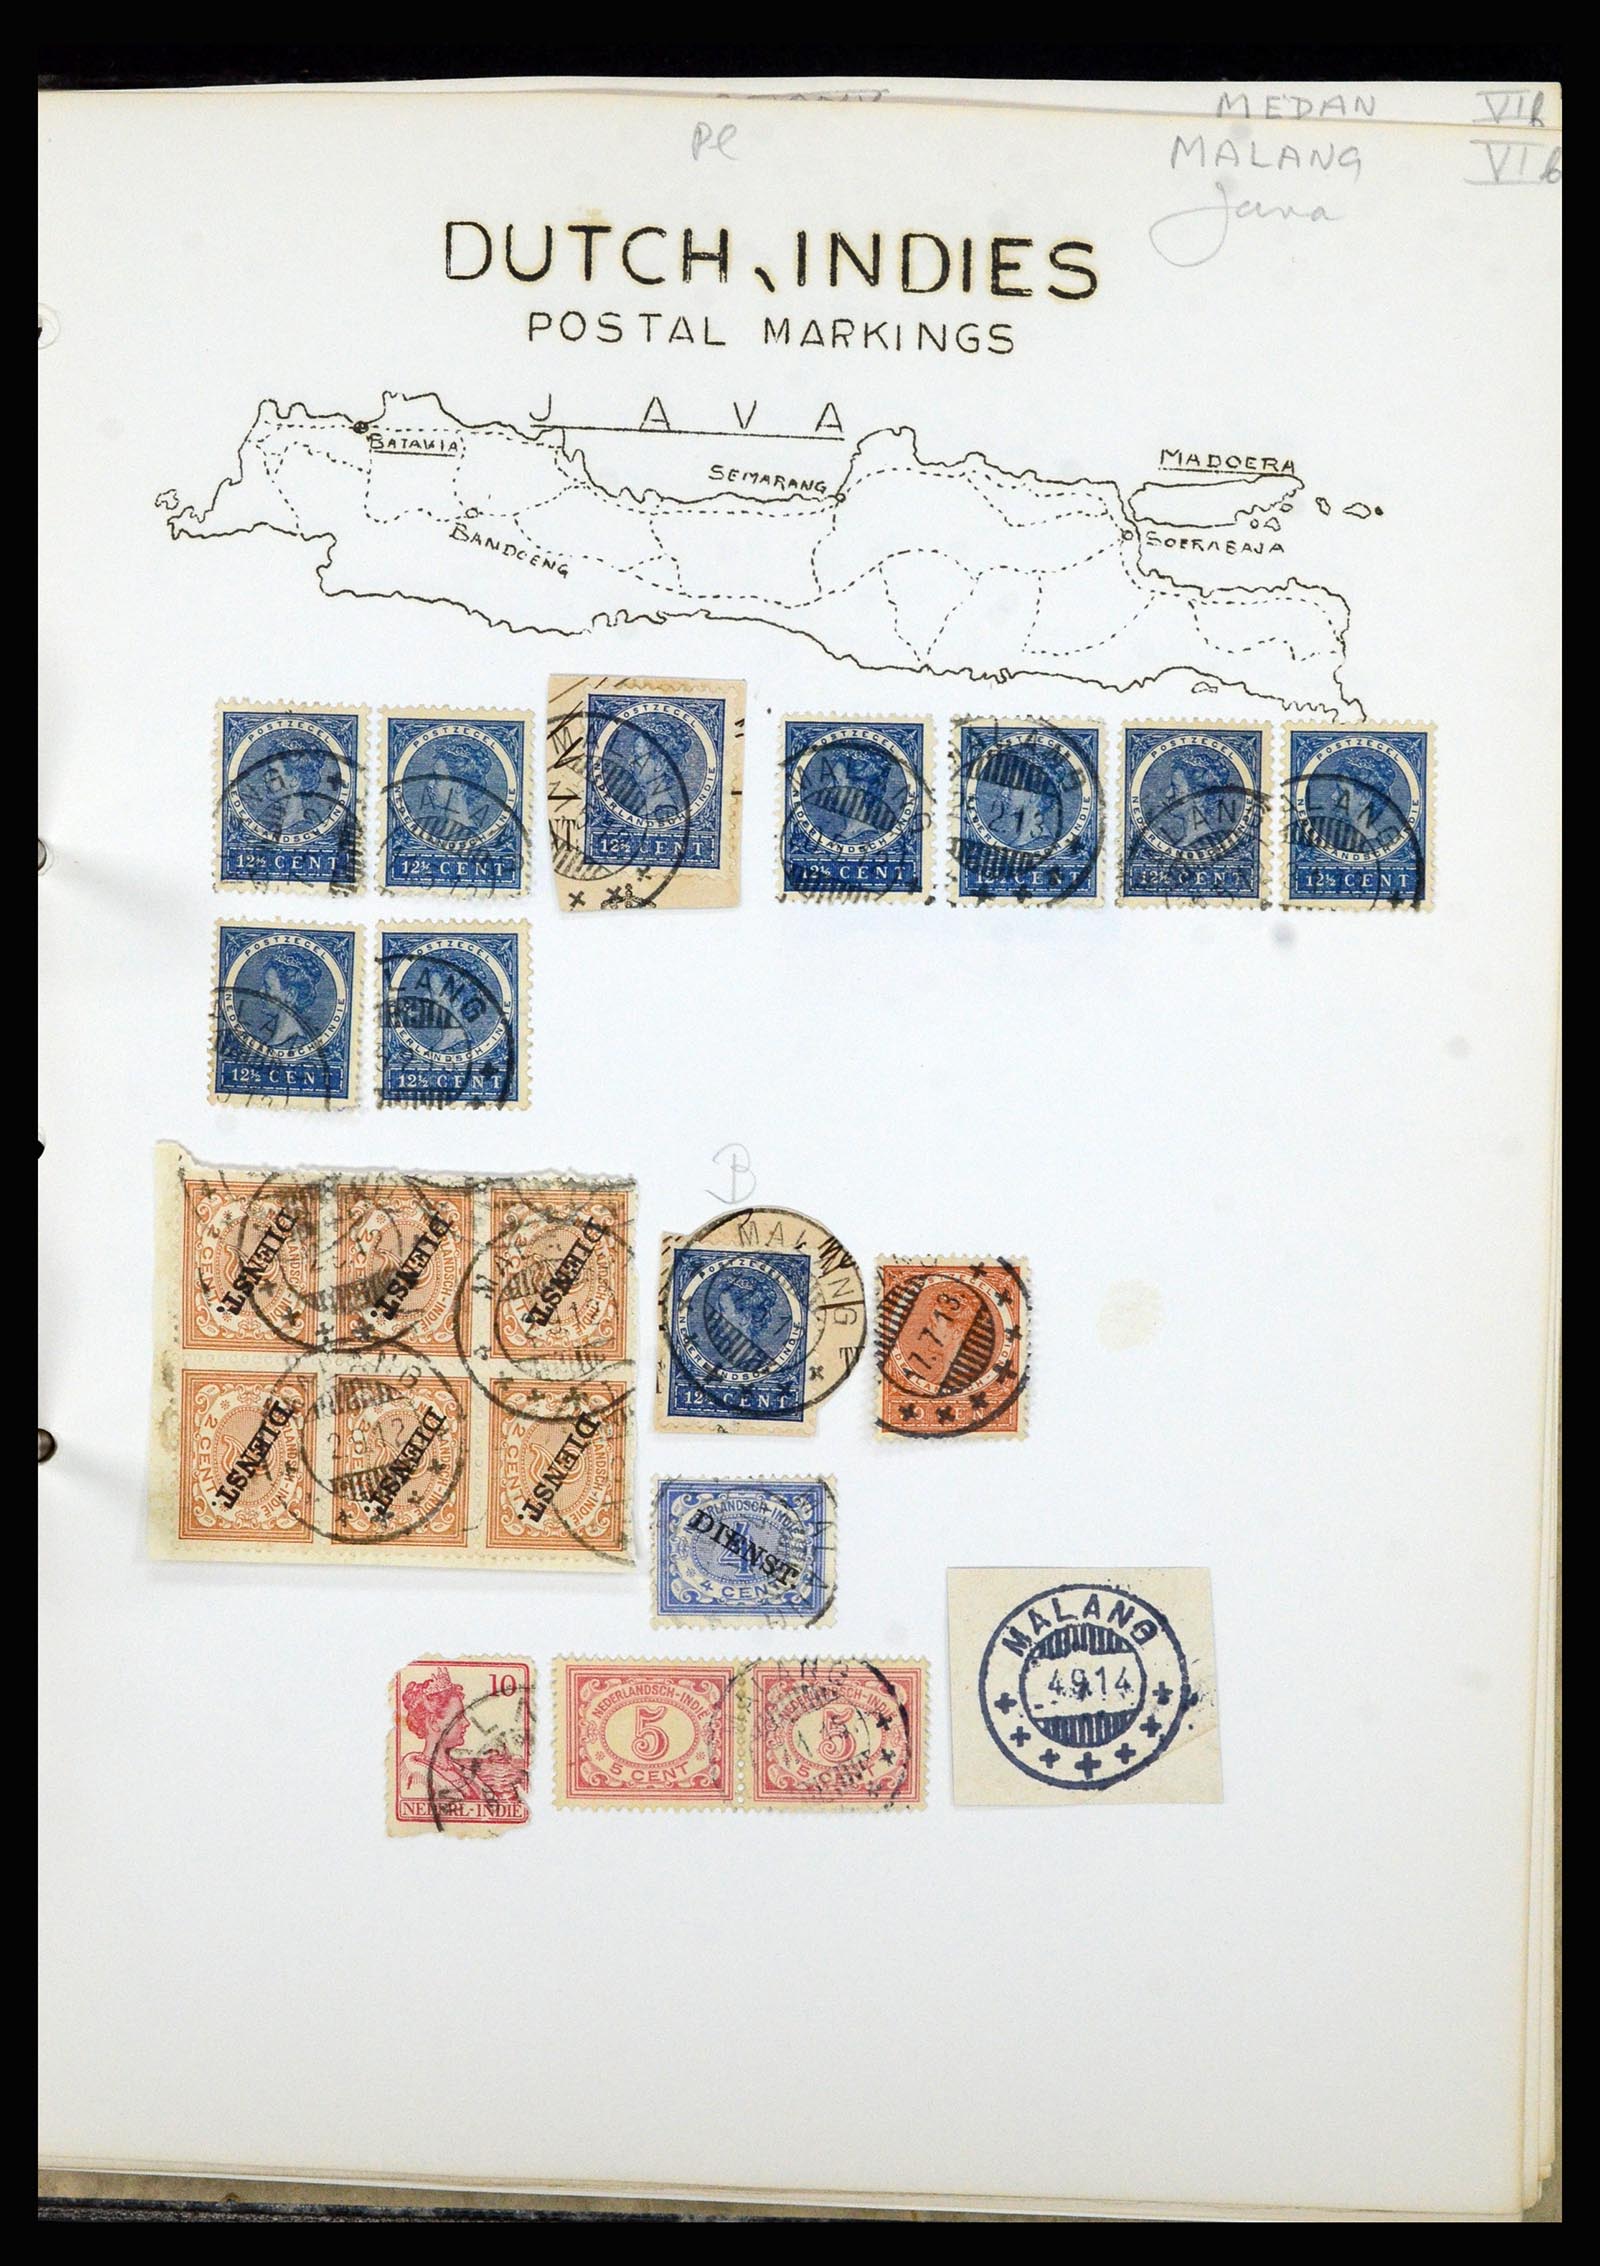 36841 063 - Stamp collection 36841 Dutch east Indies short bar cancels.